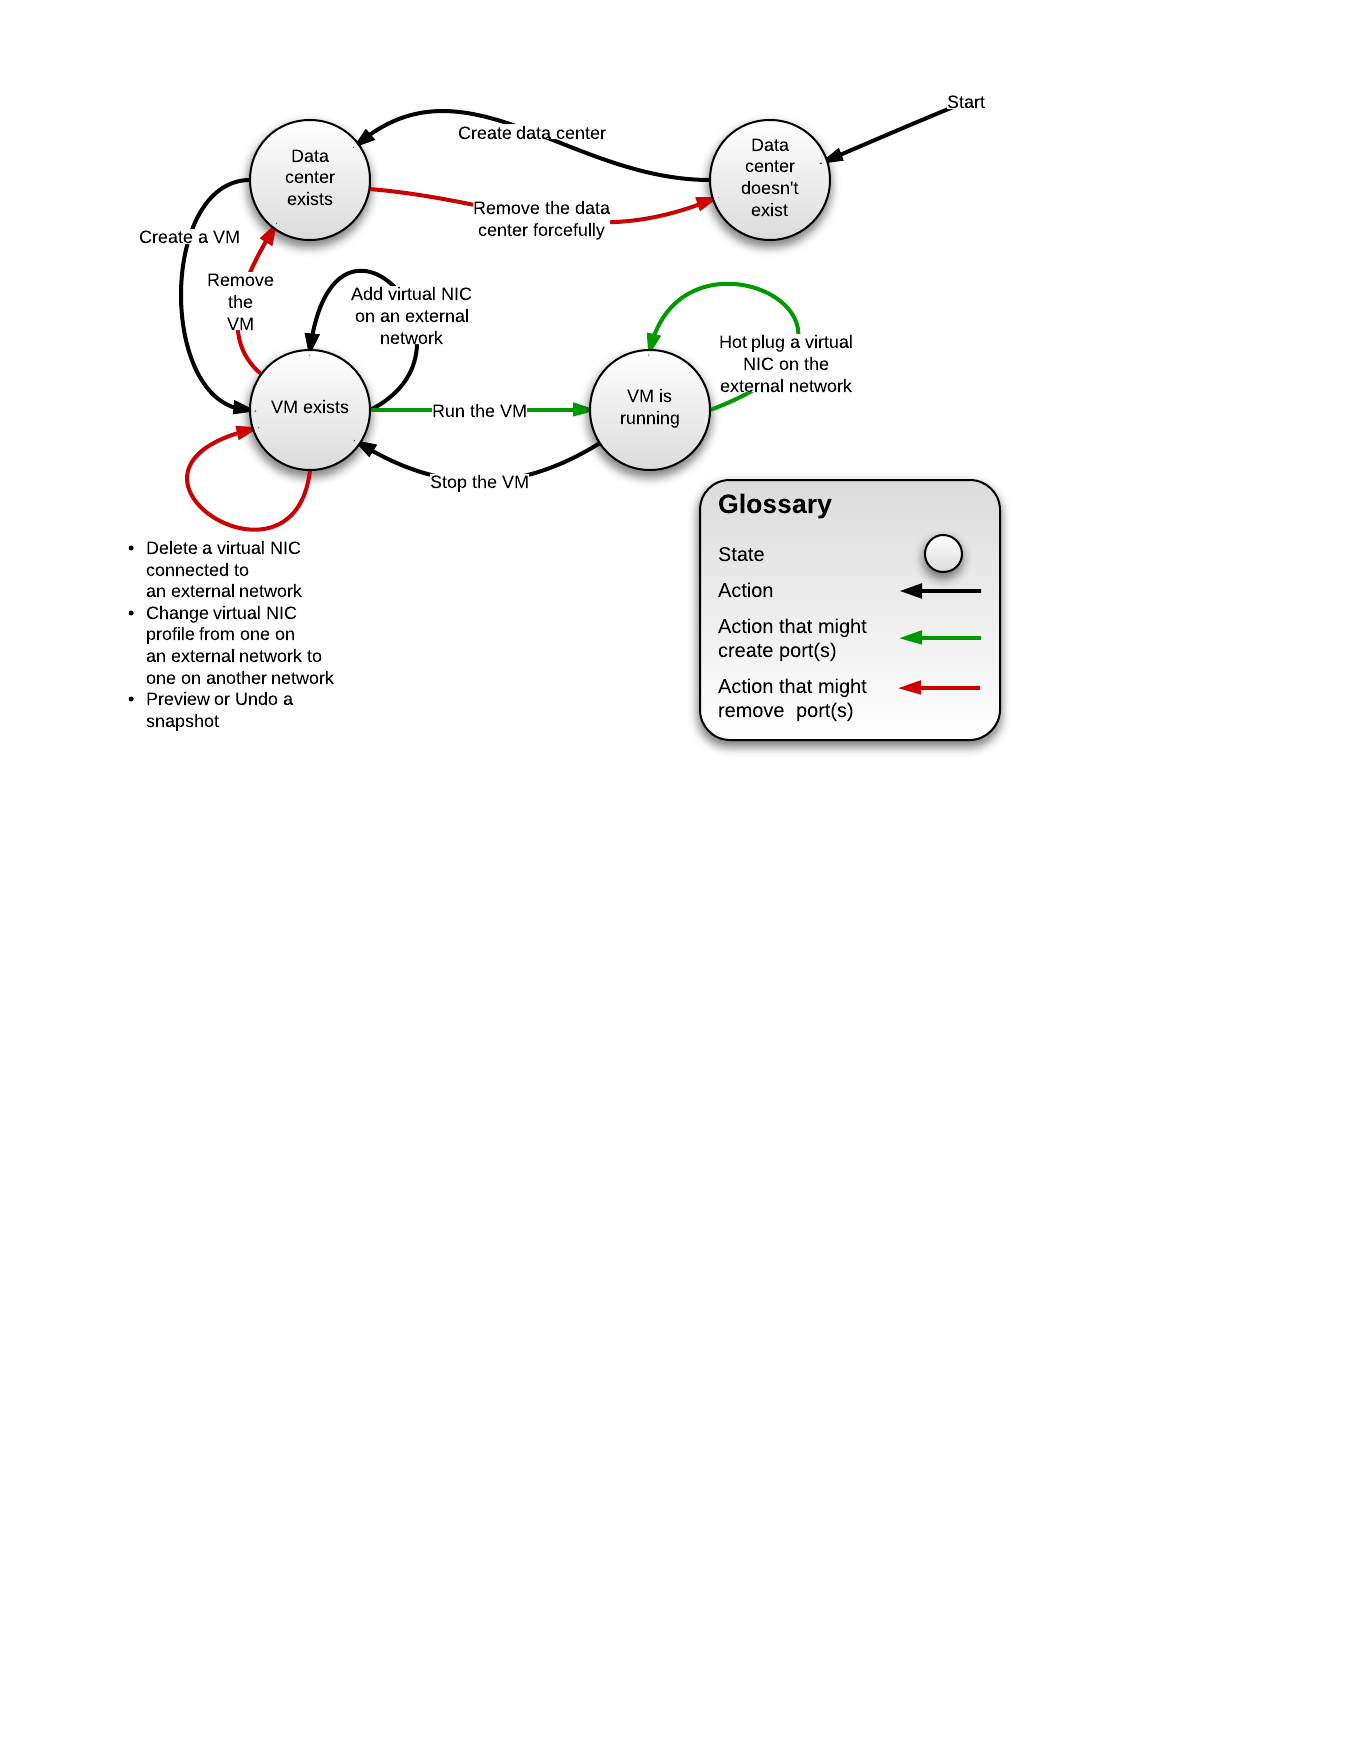 A flow chart outlining the major lifecycle stages and the transitions between them.